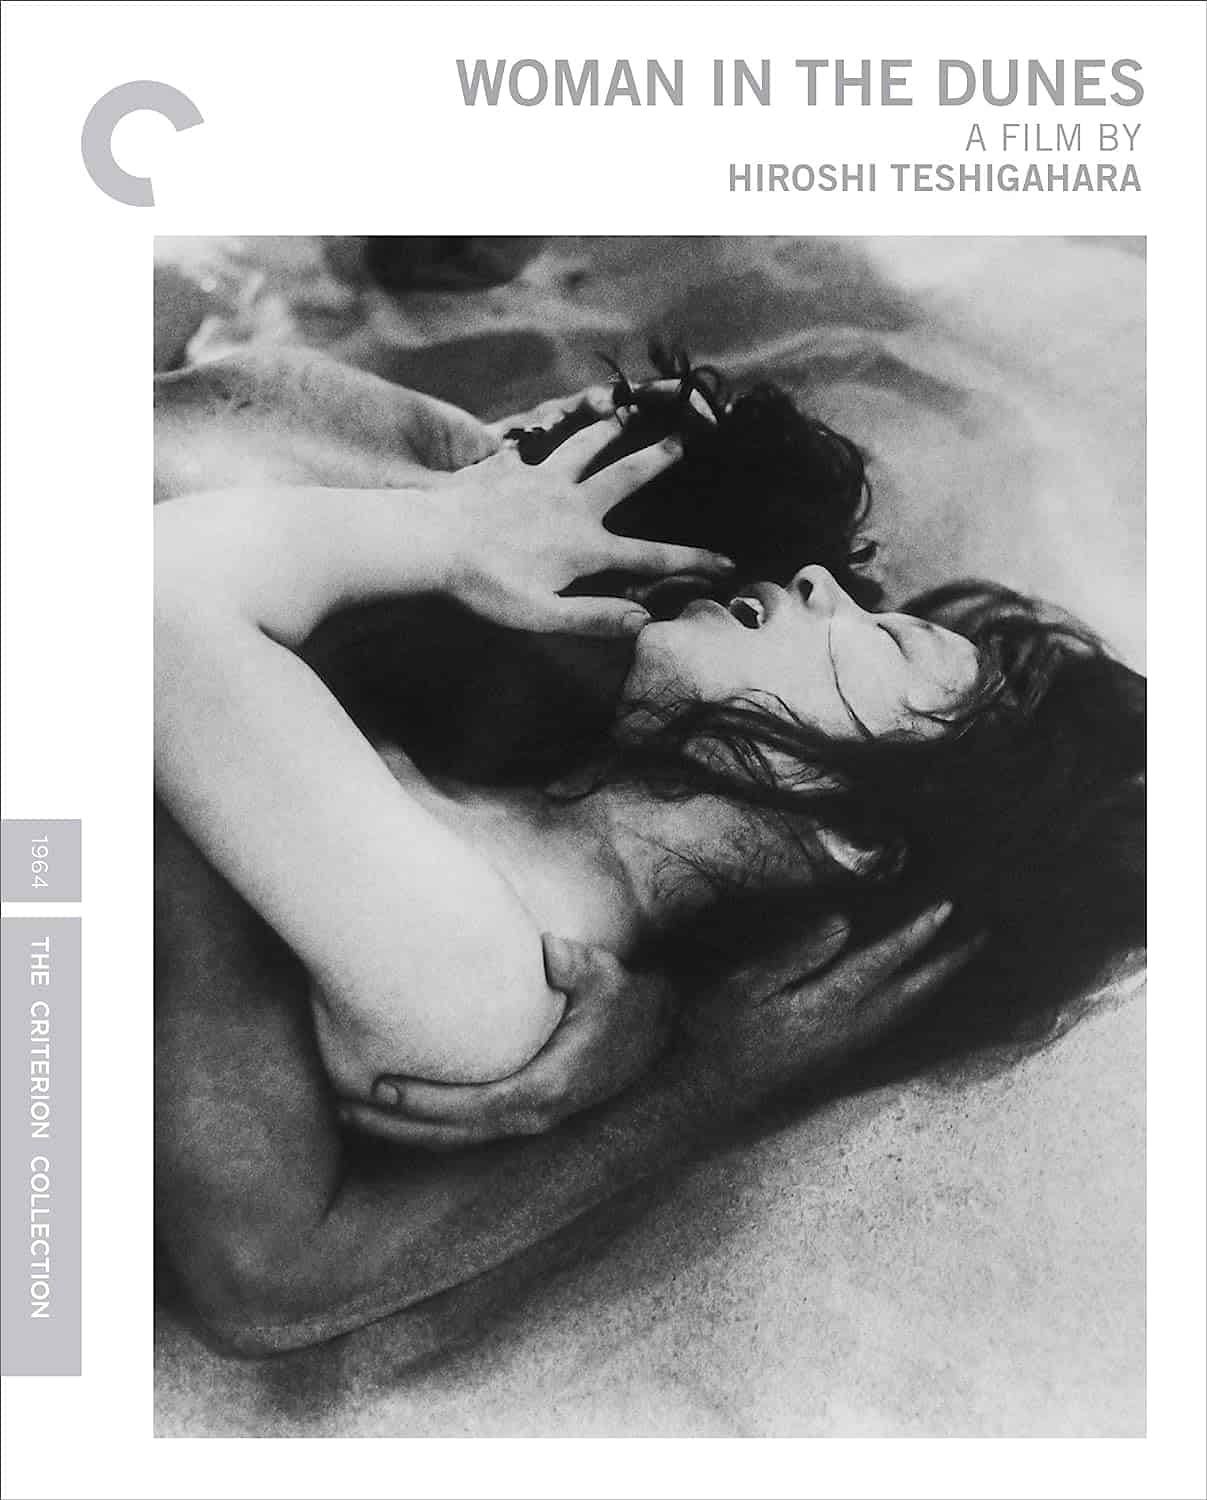 Woman in the Dunes Amazon/Criterion